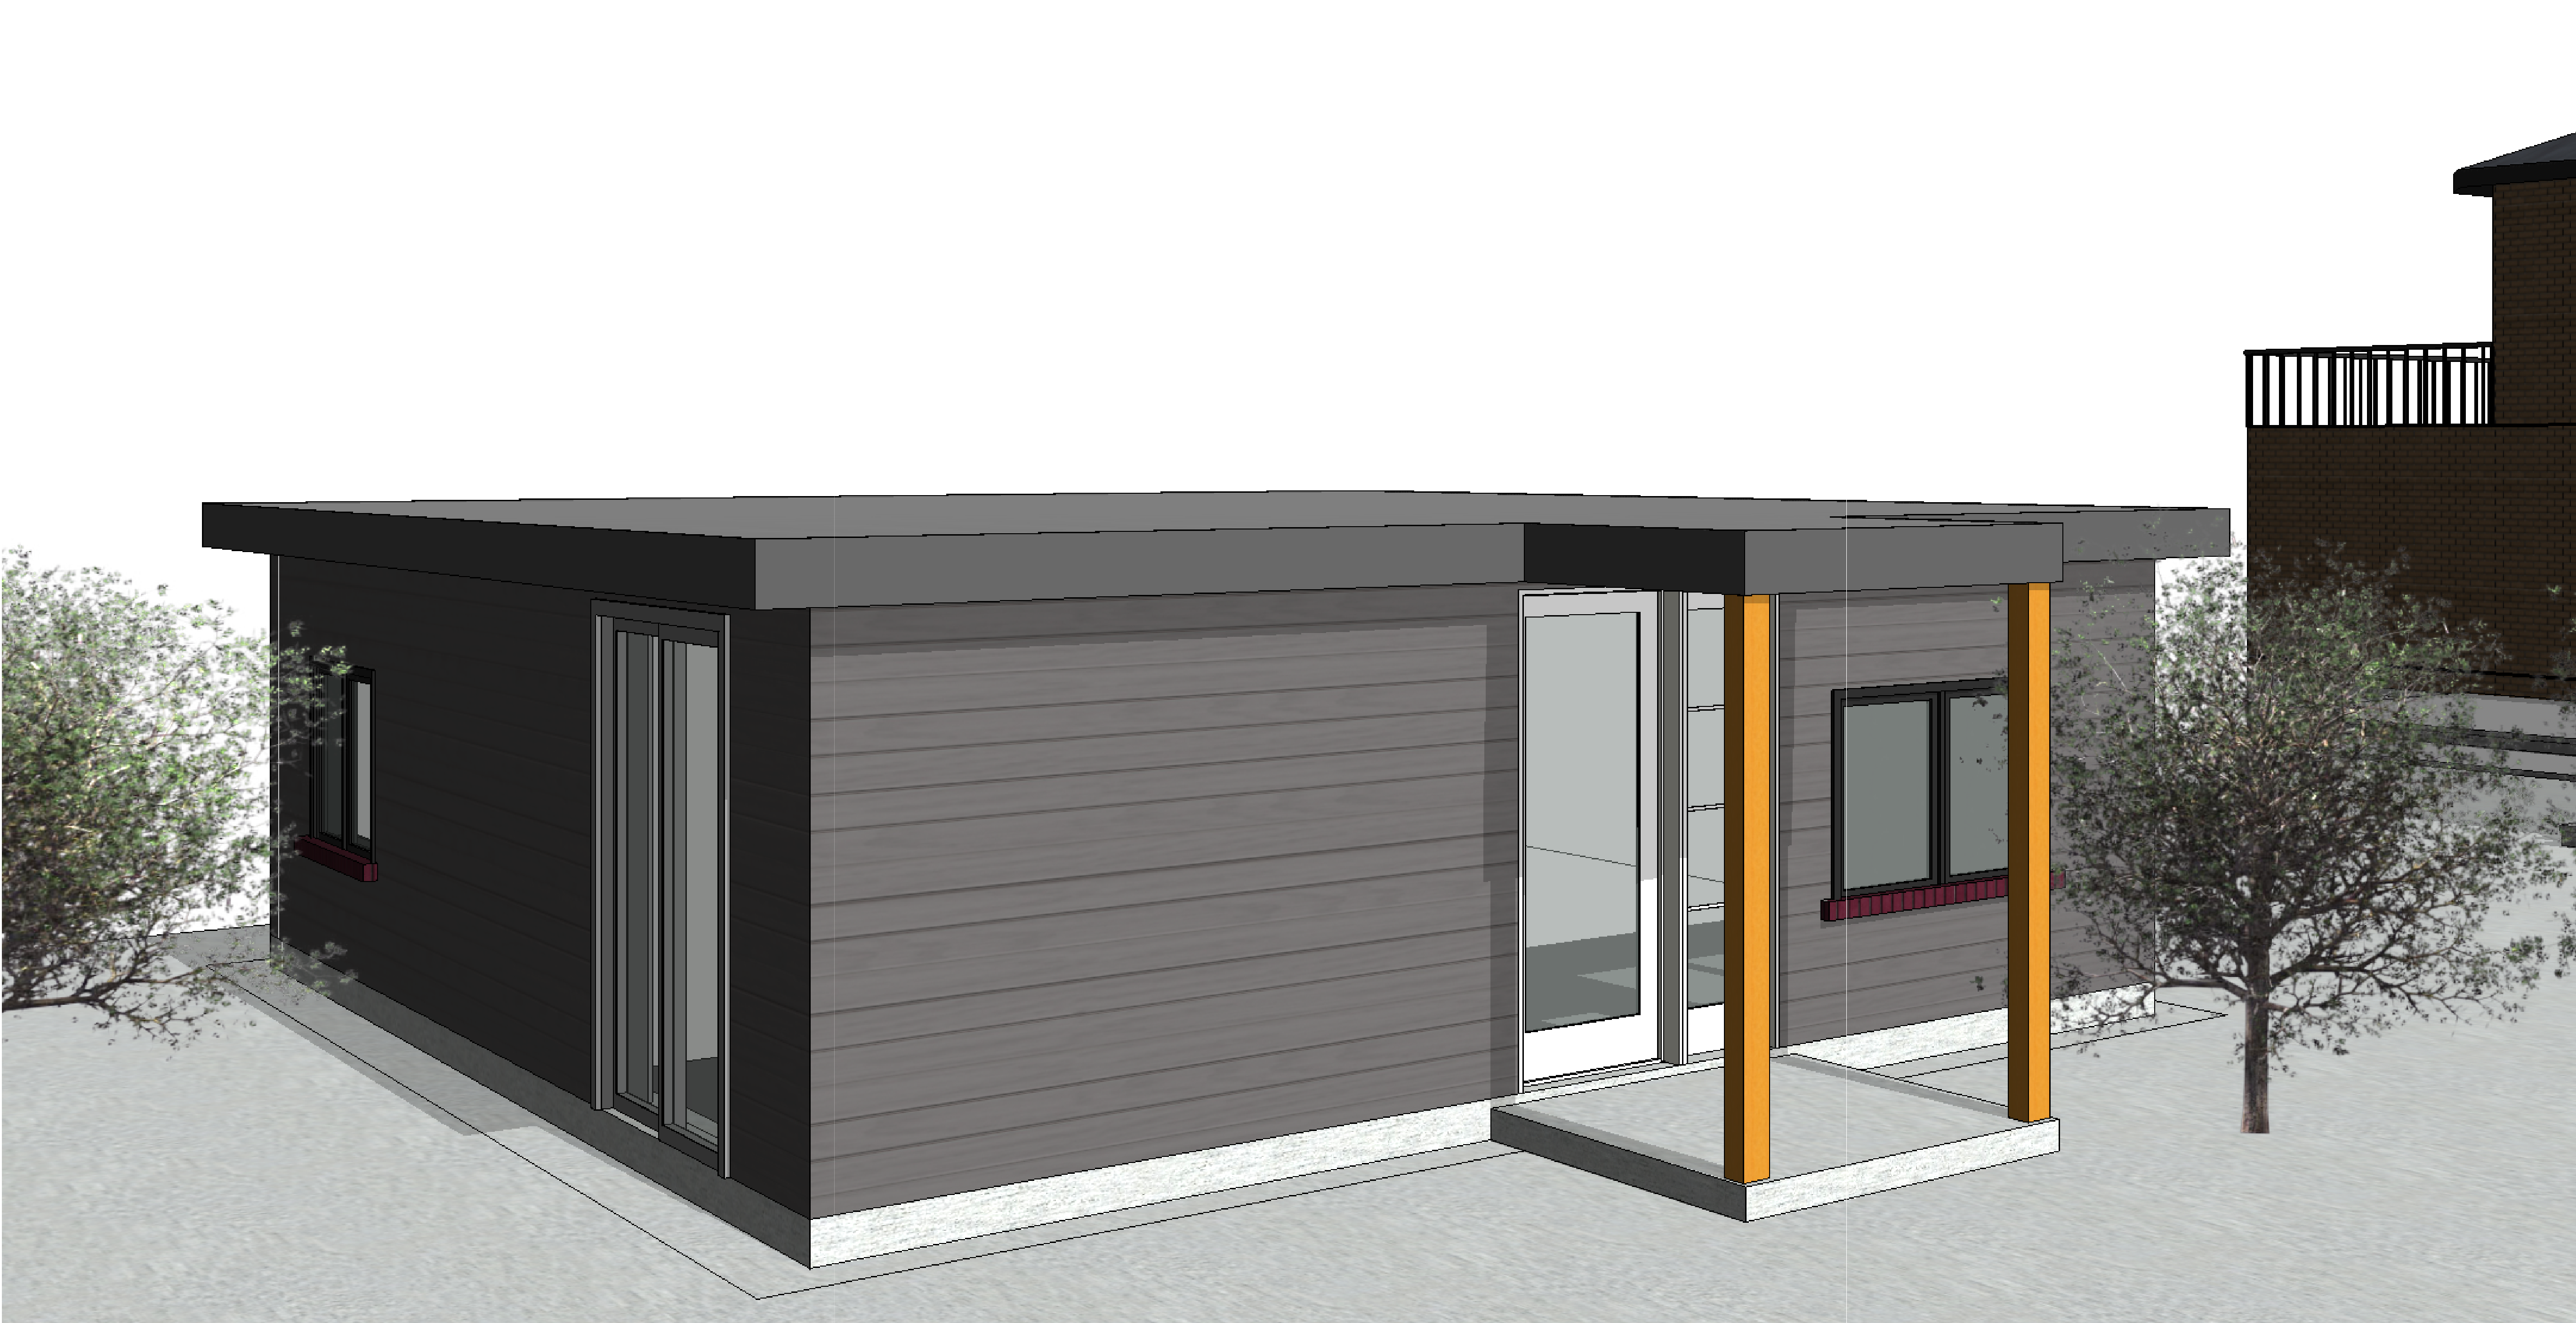 Rendering showing tiny home plans